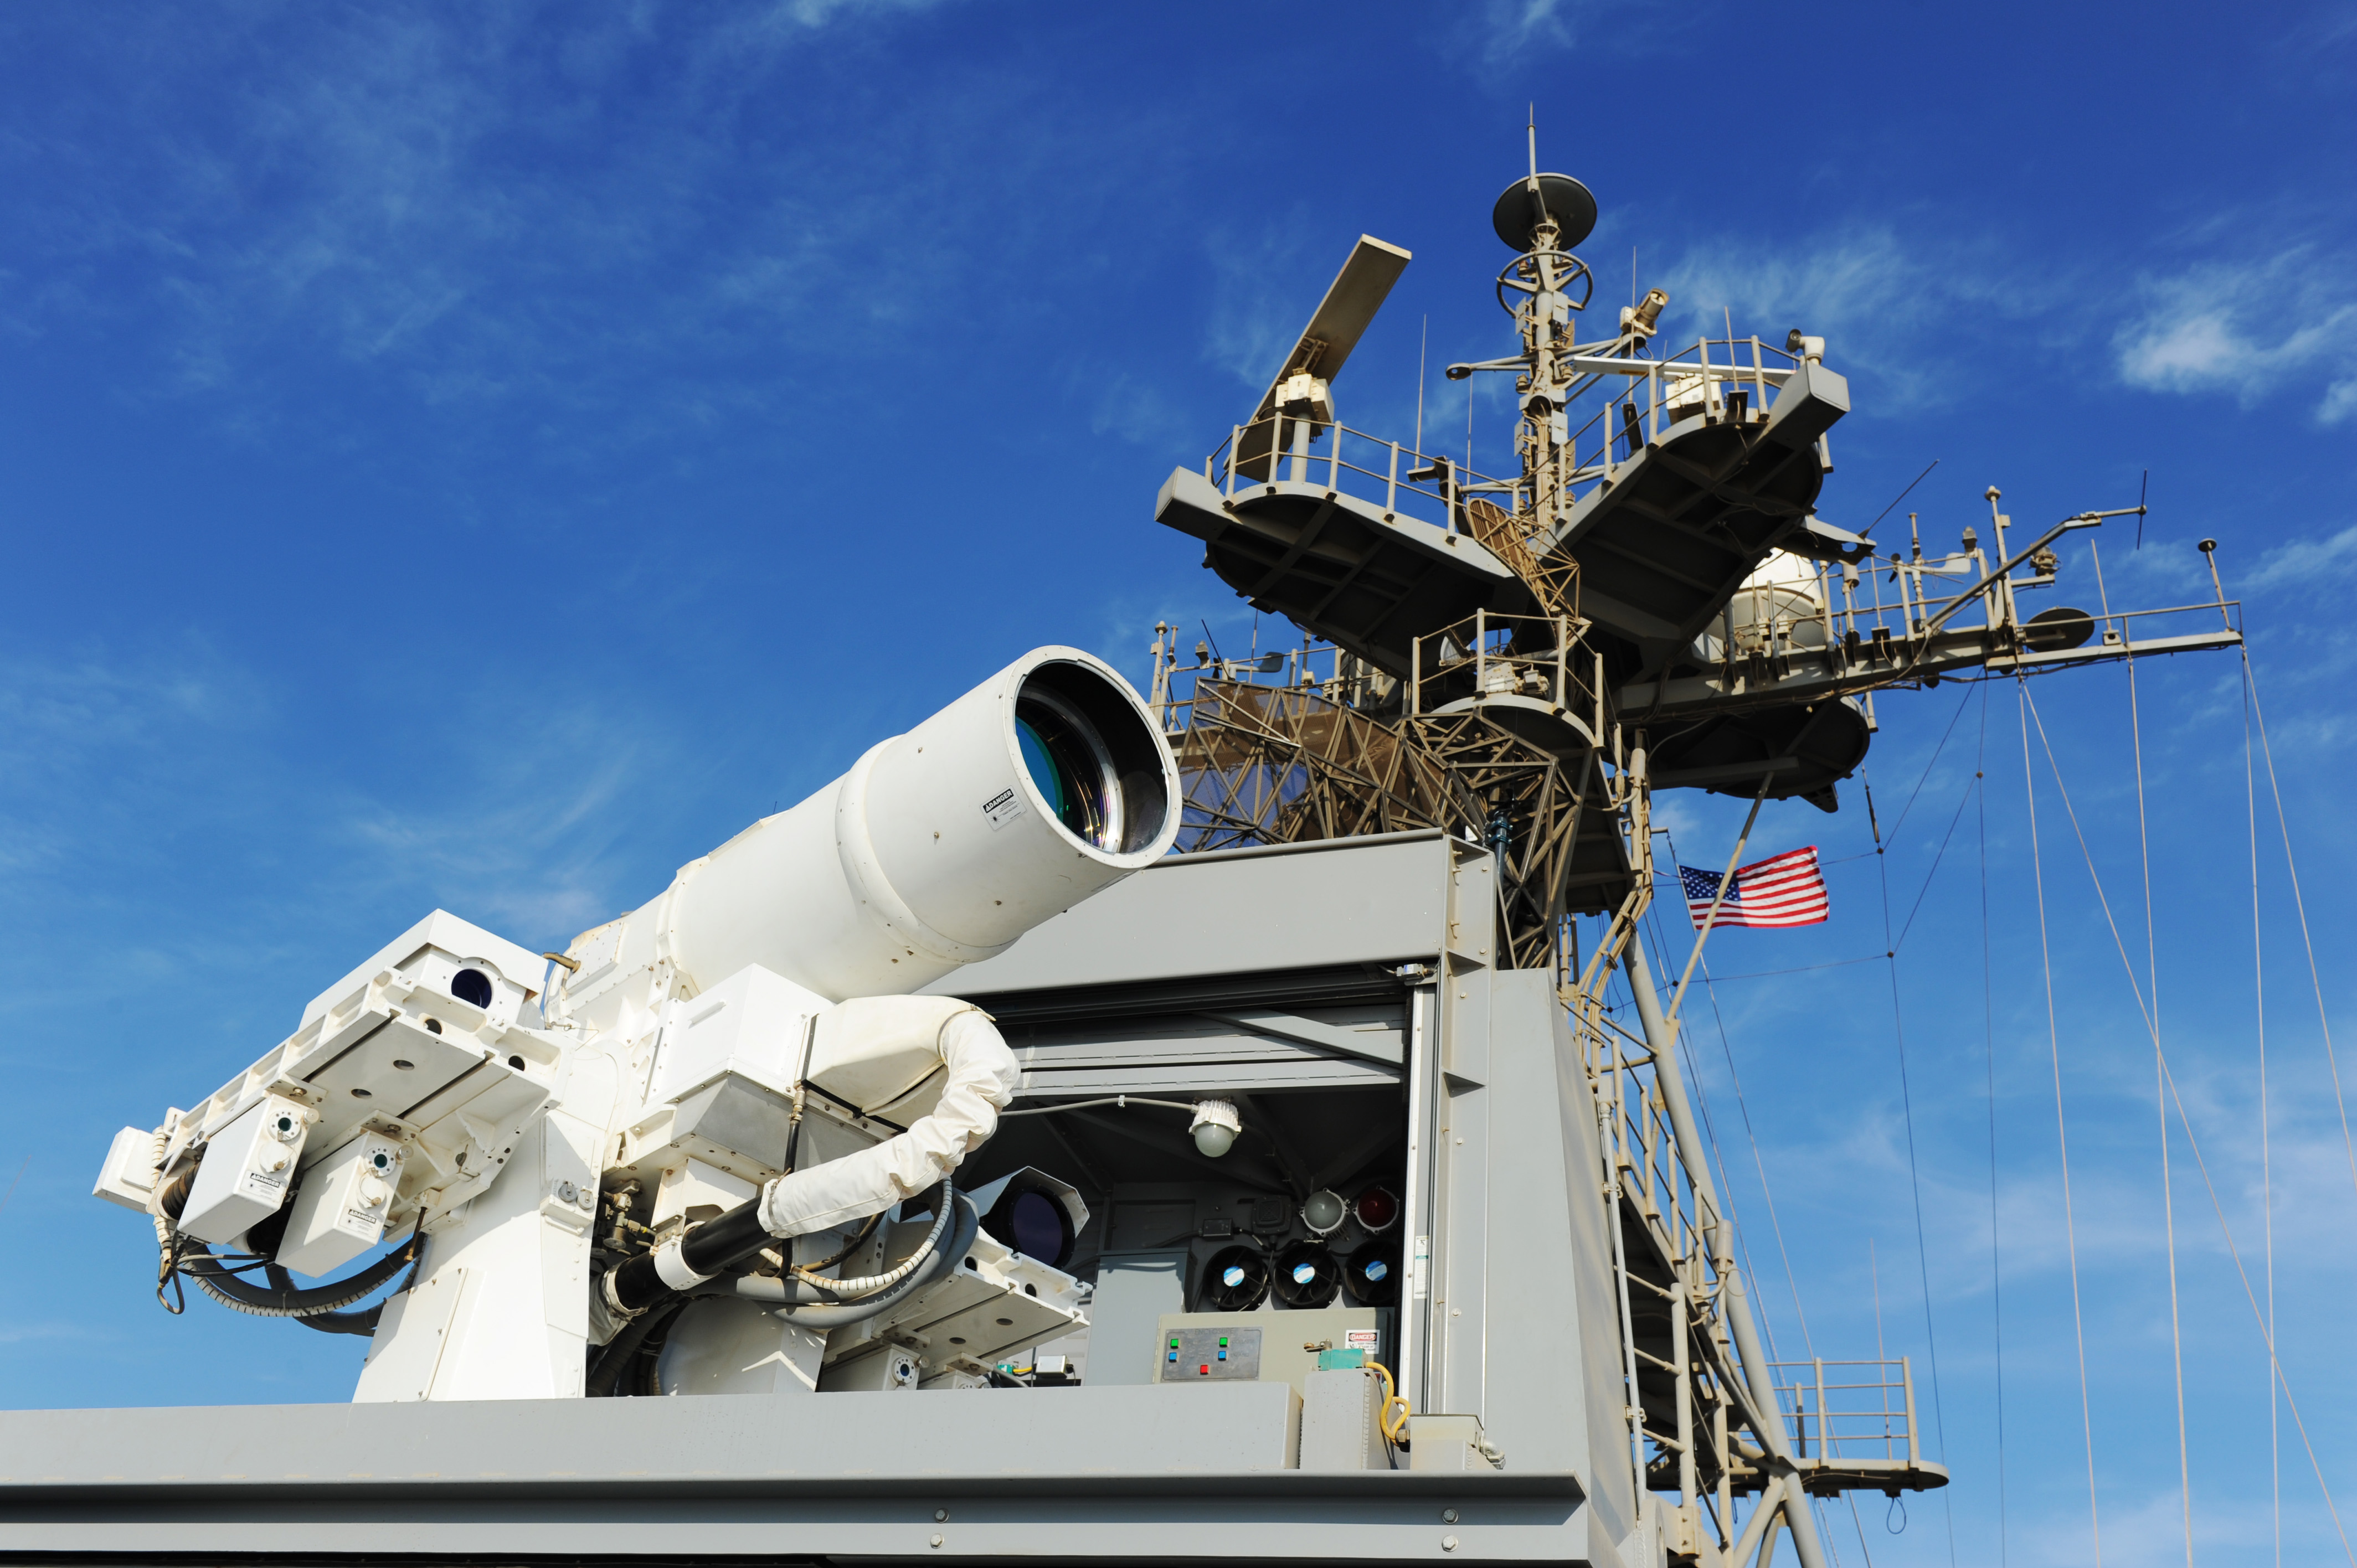 MDA With Laser Prototypes For Surface Warfare, Ballistic Missile Defense USNI News